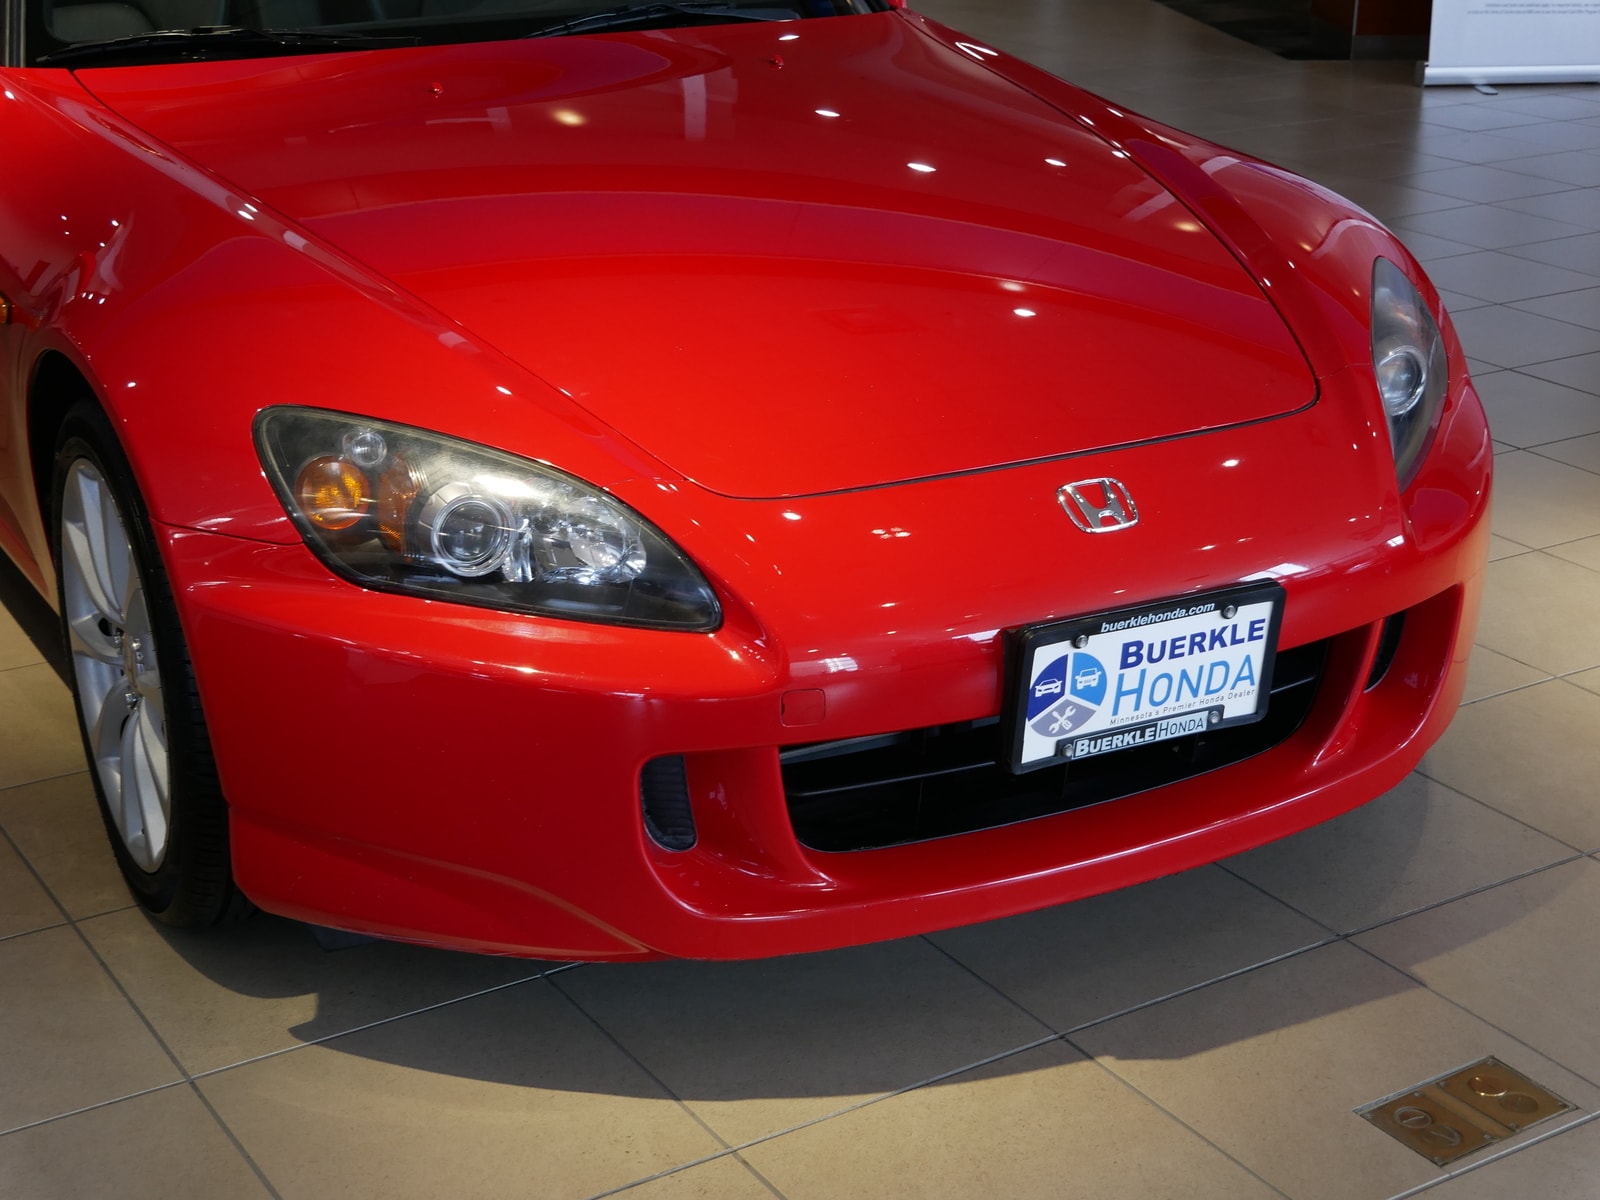 Used 2006 Honda S2000  with VIN JHMAP21436S002964 for sale in Saint Paul, Minnesota